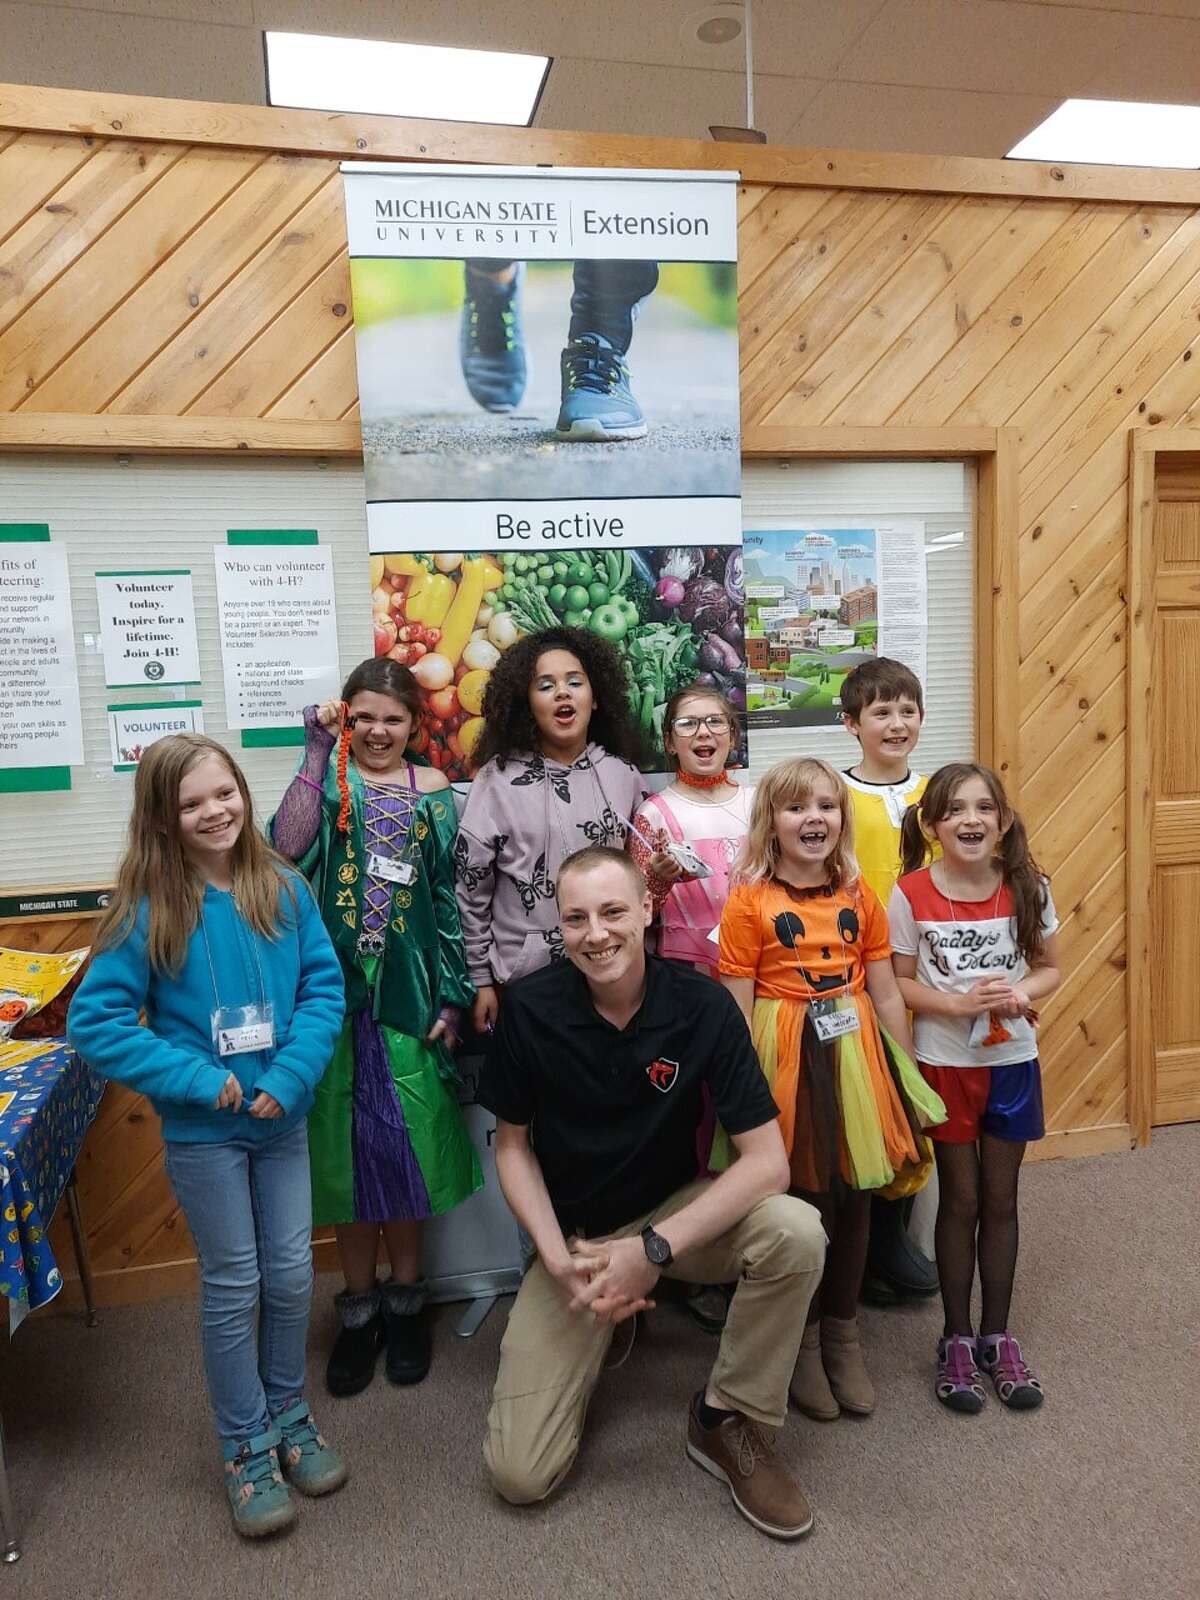 Lake County 4-H youth attended disaster preparation classes recently presented by Red Fox Tactical Training, an organization that provides emergency and technical response training for first responders and law enforcement.